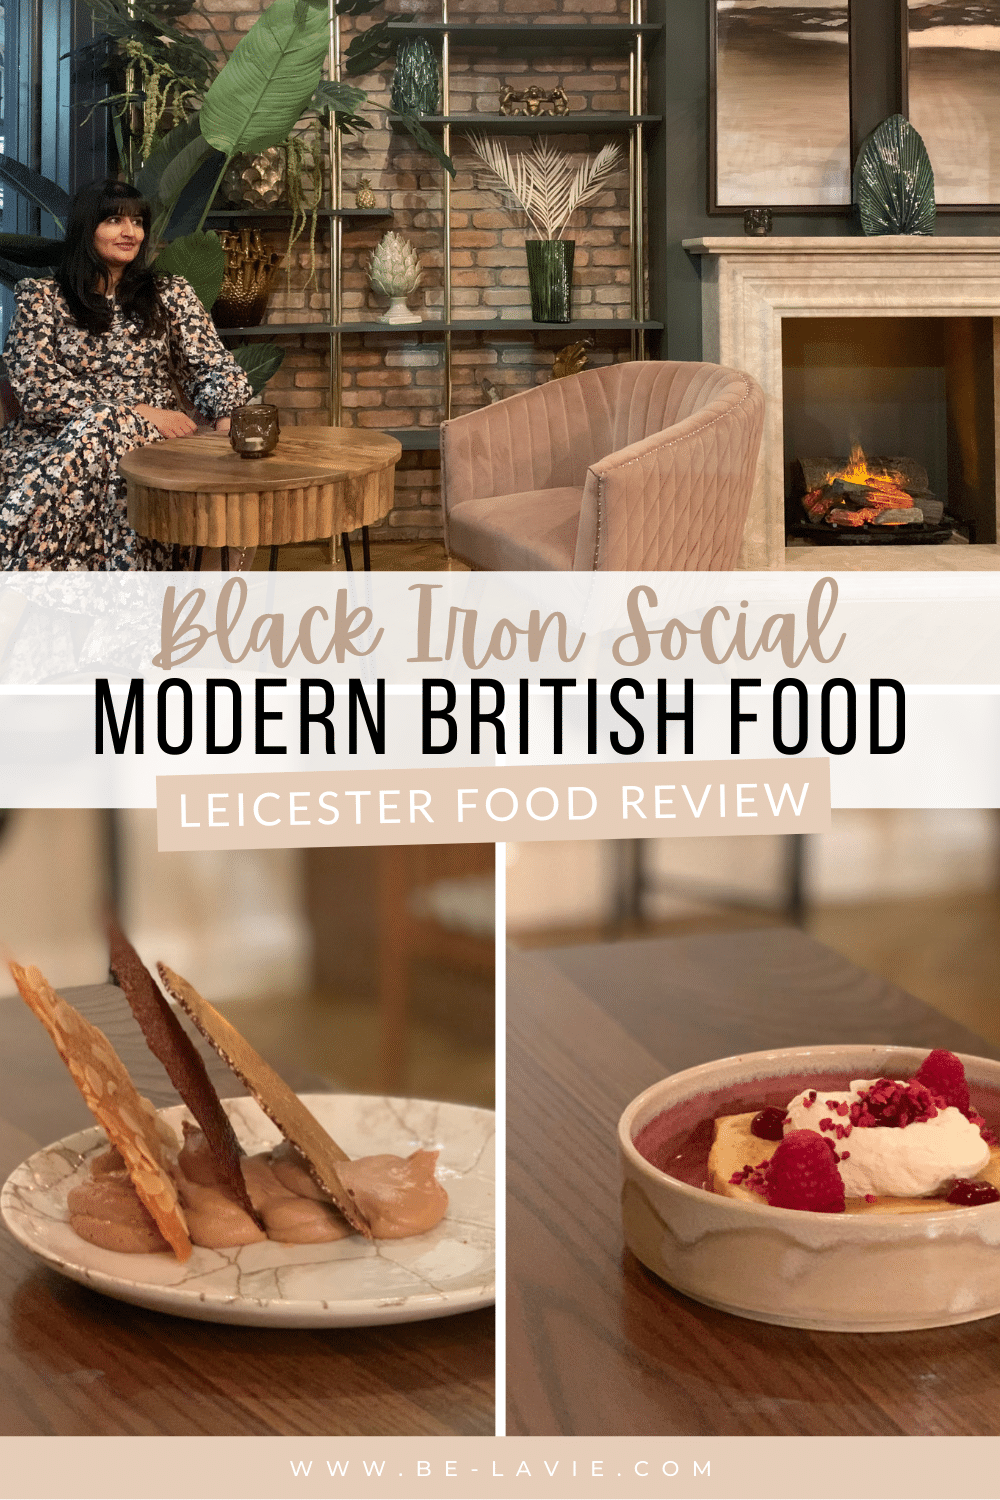 Black Iron Social: Great Contemporary British Dining in Leicester